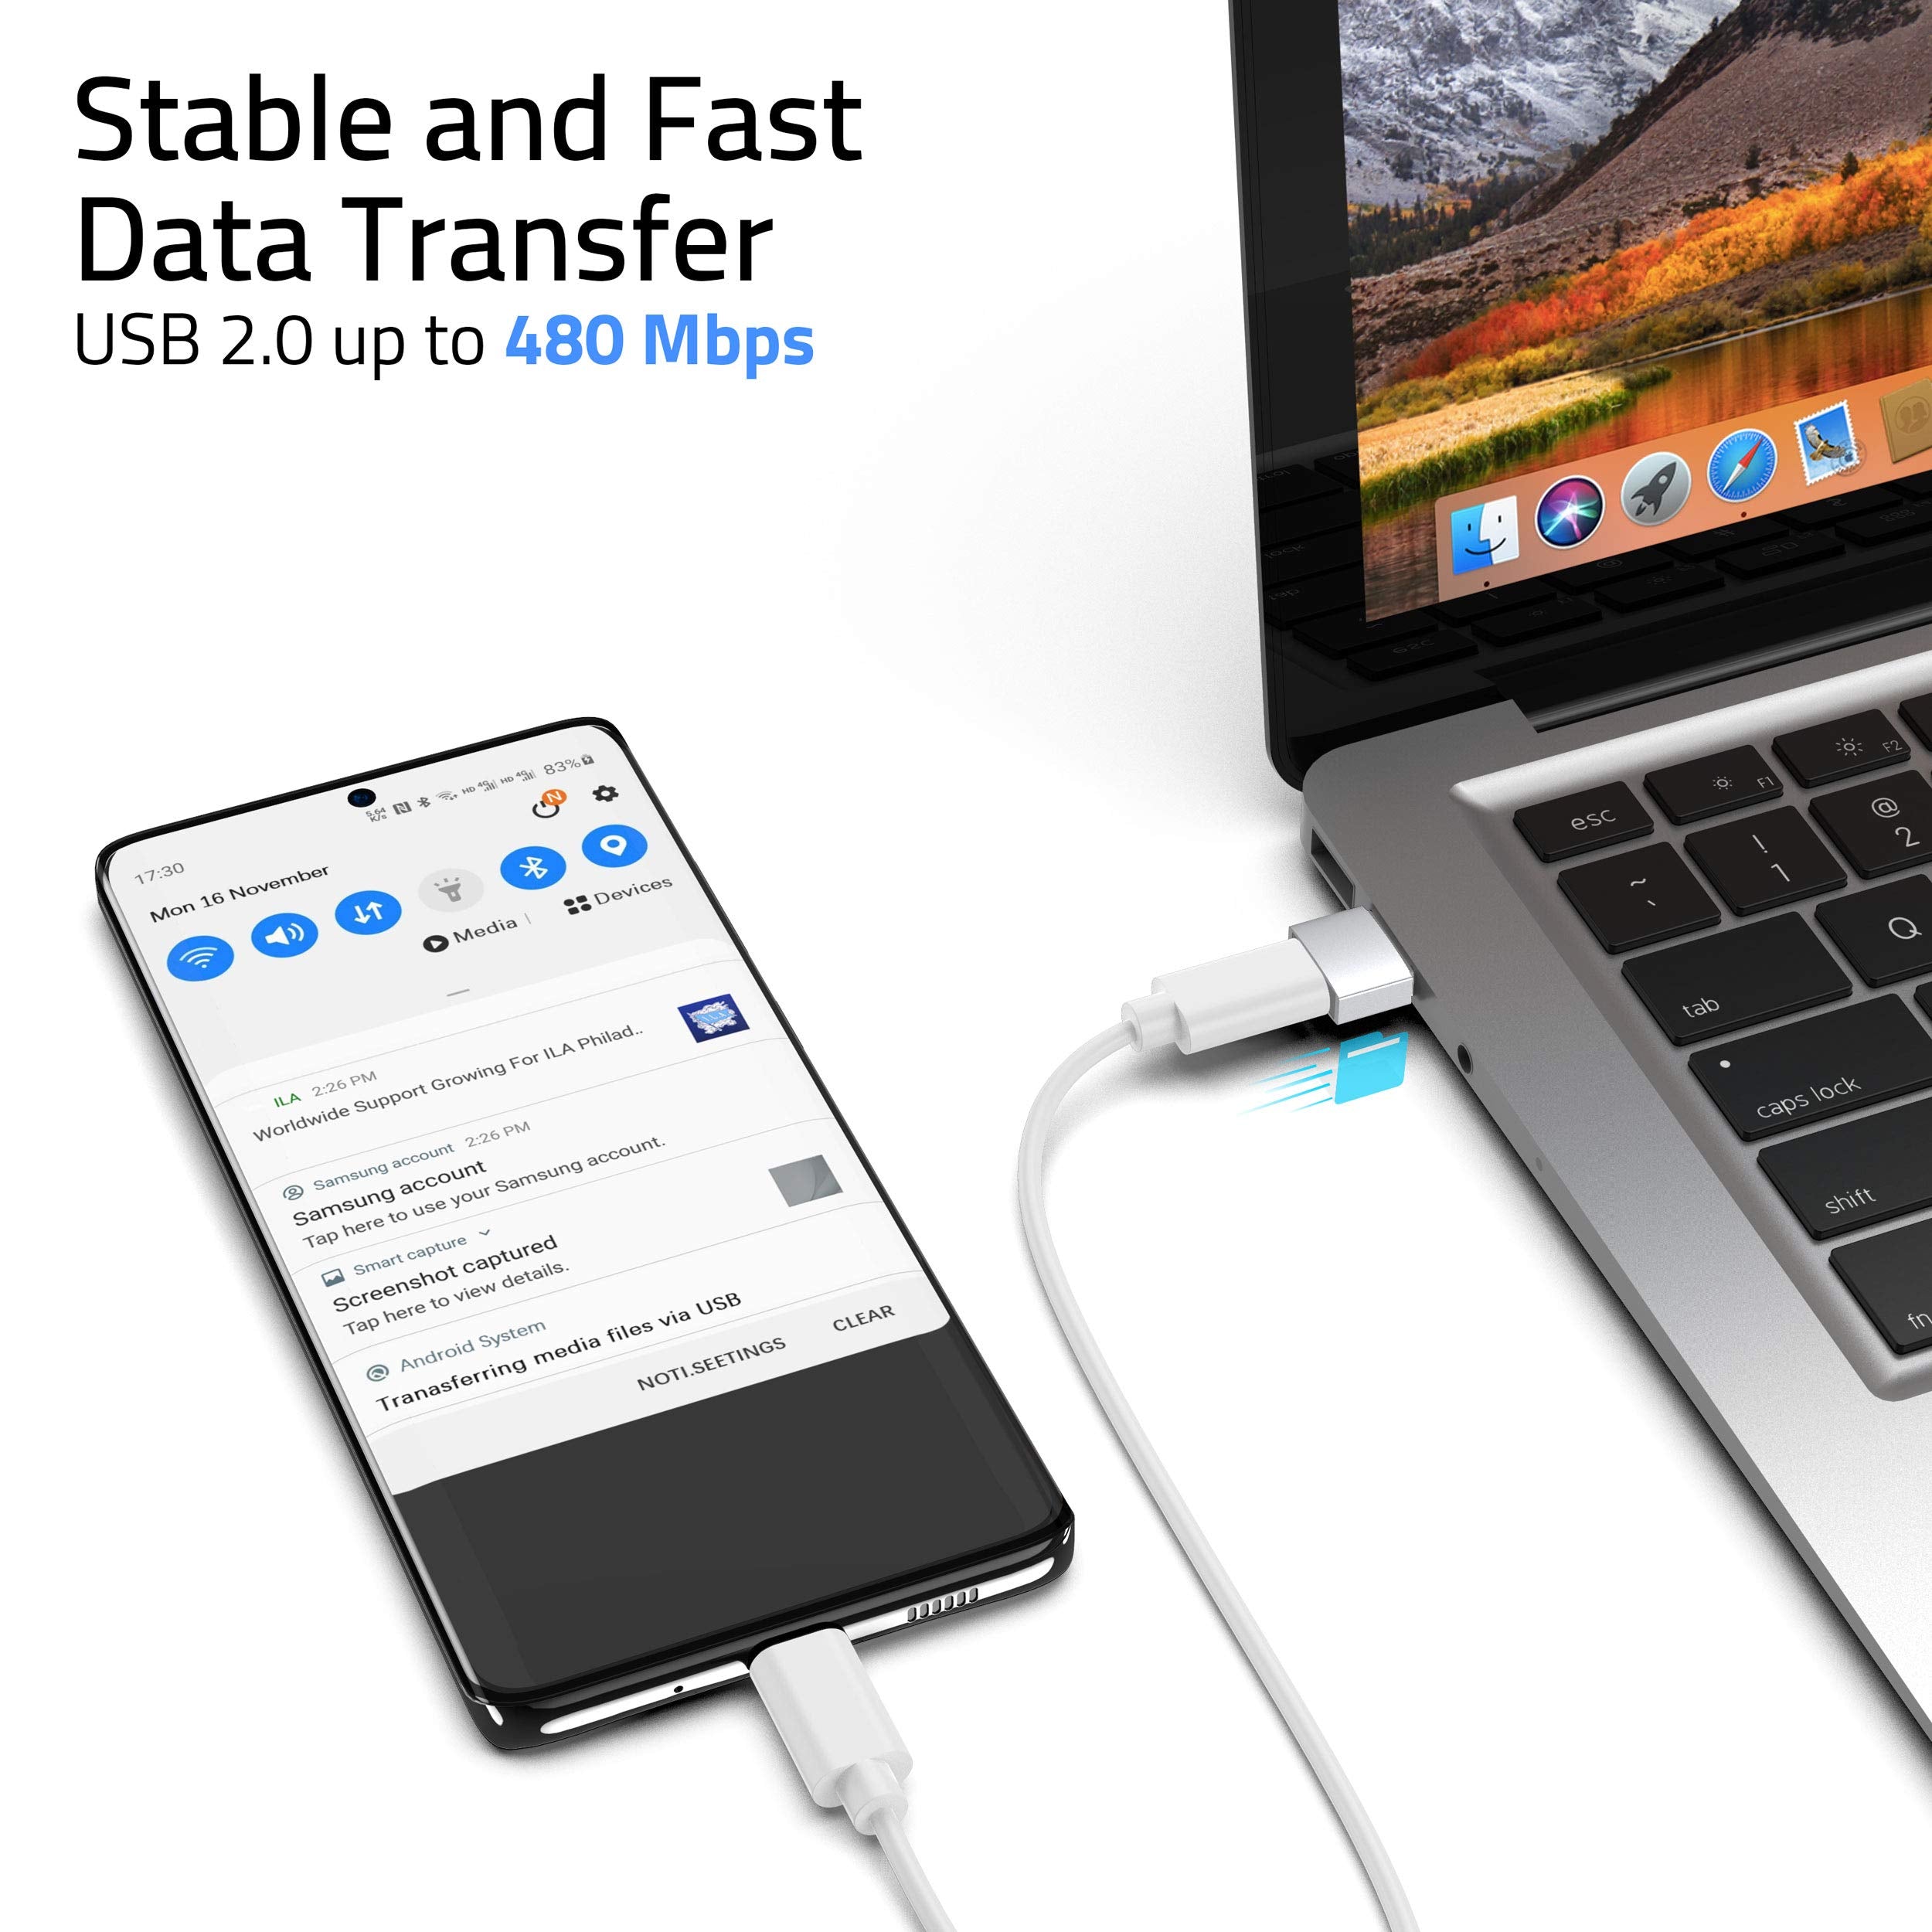 usb 2.0 up to 480 mbps